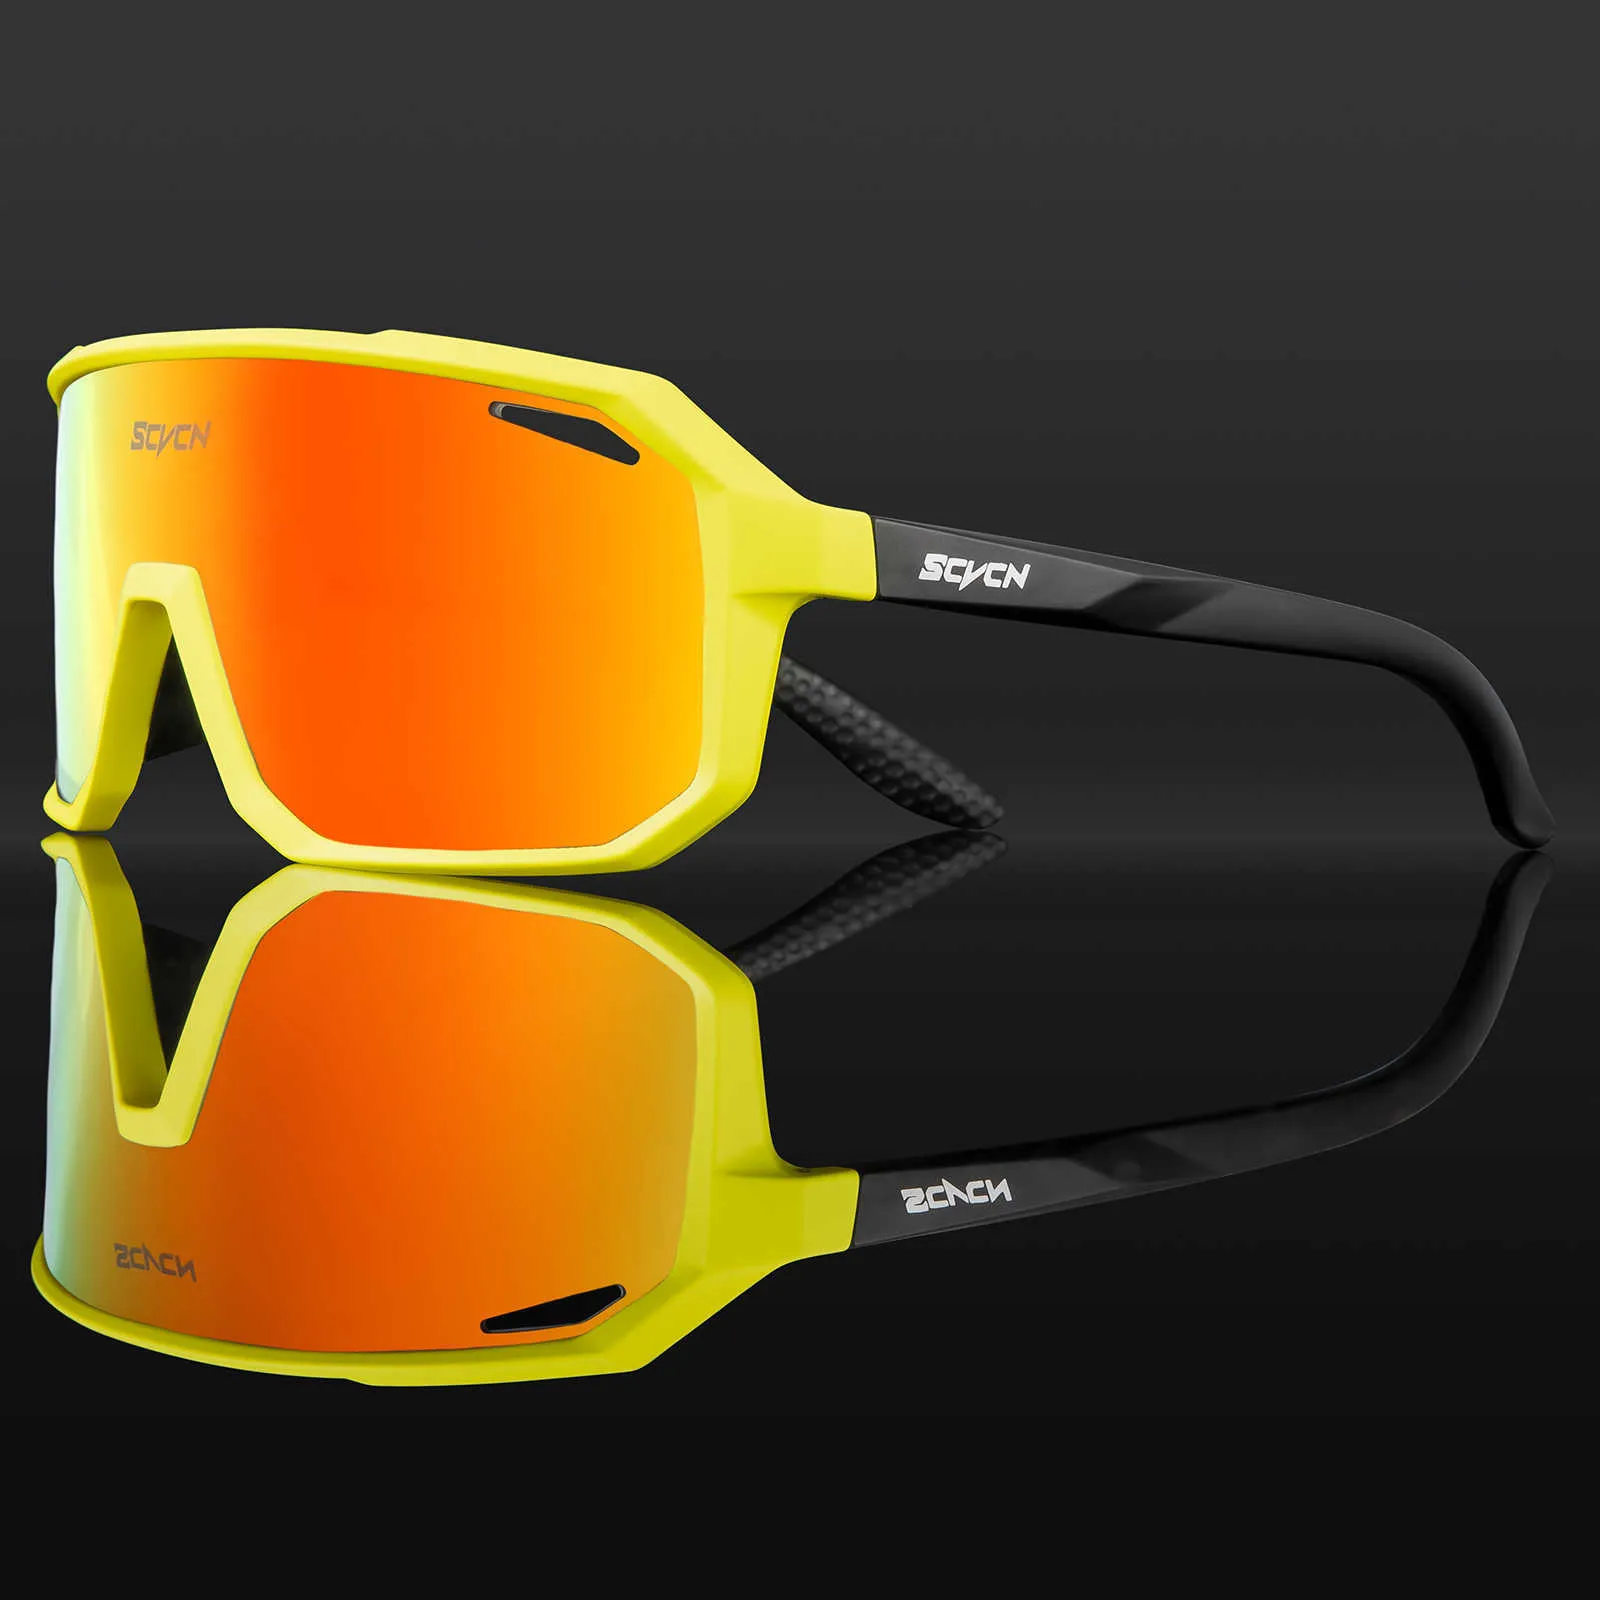 SCVCN Mens Outdoor Sports Glasses Lenskart For Cycling, Mountain Biking,  And Hiking From Channeli, $4.4